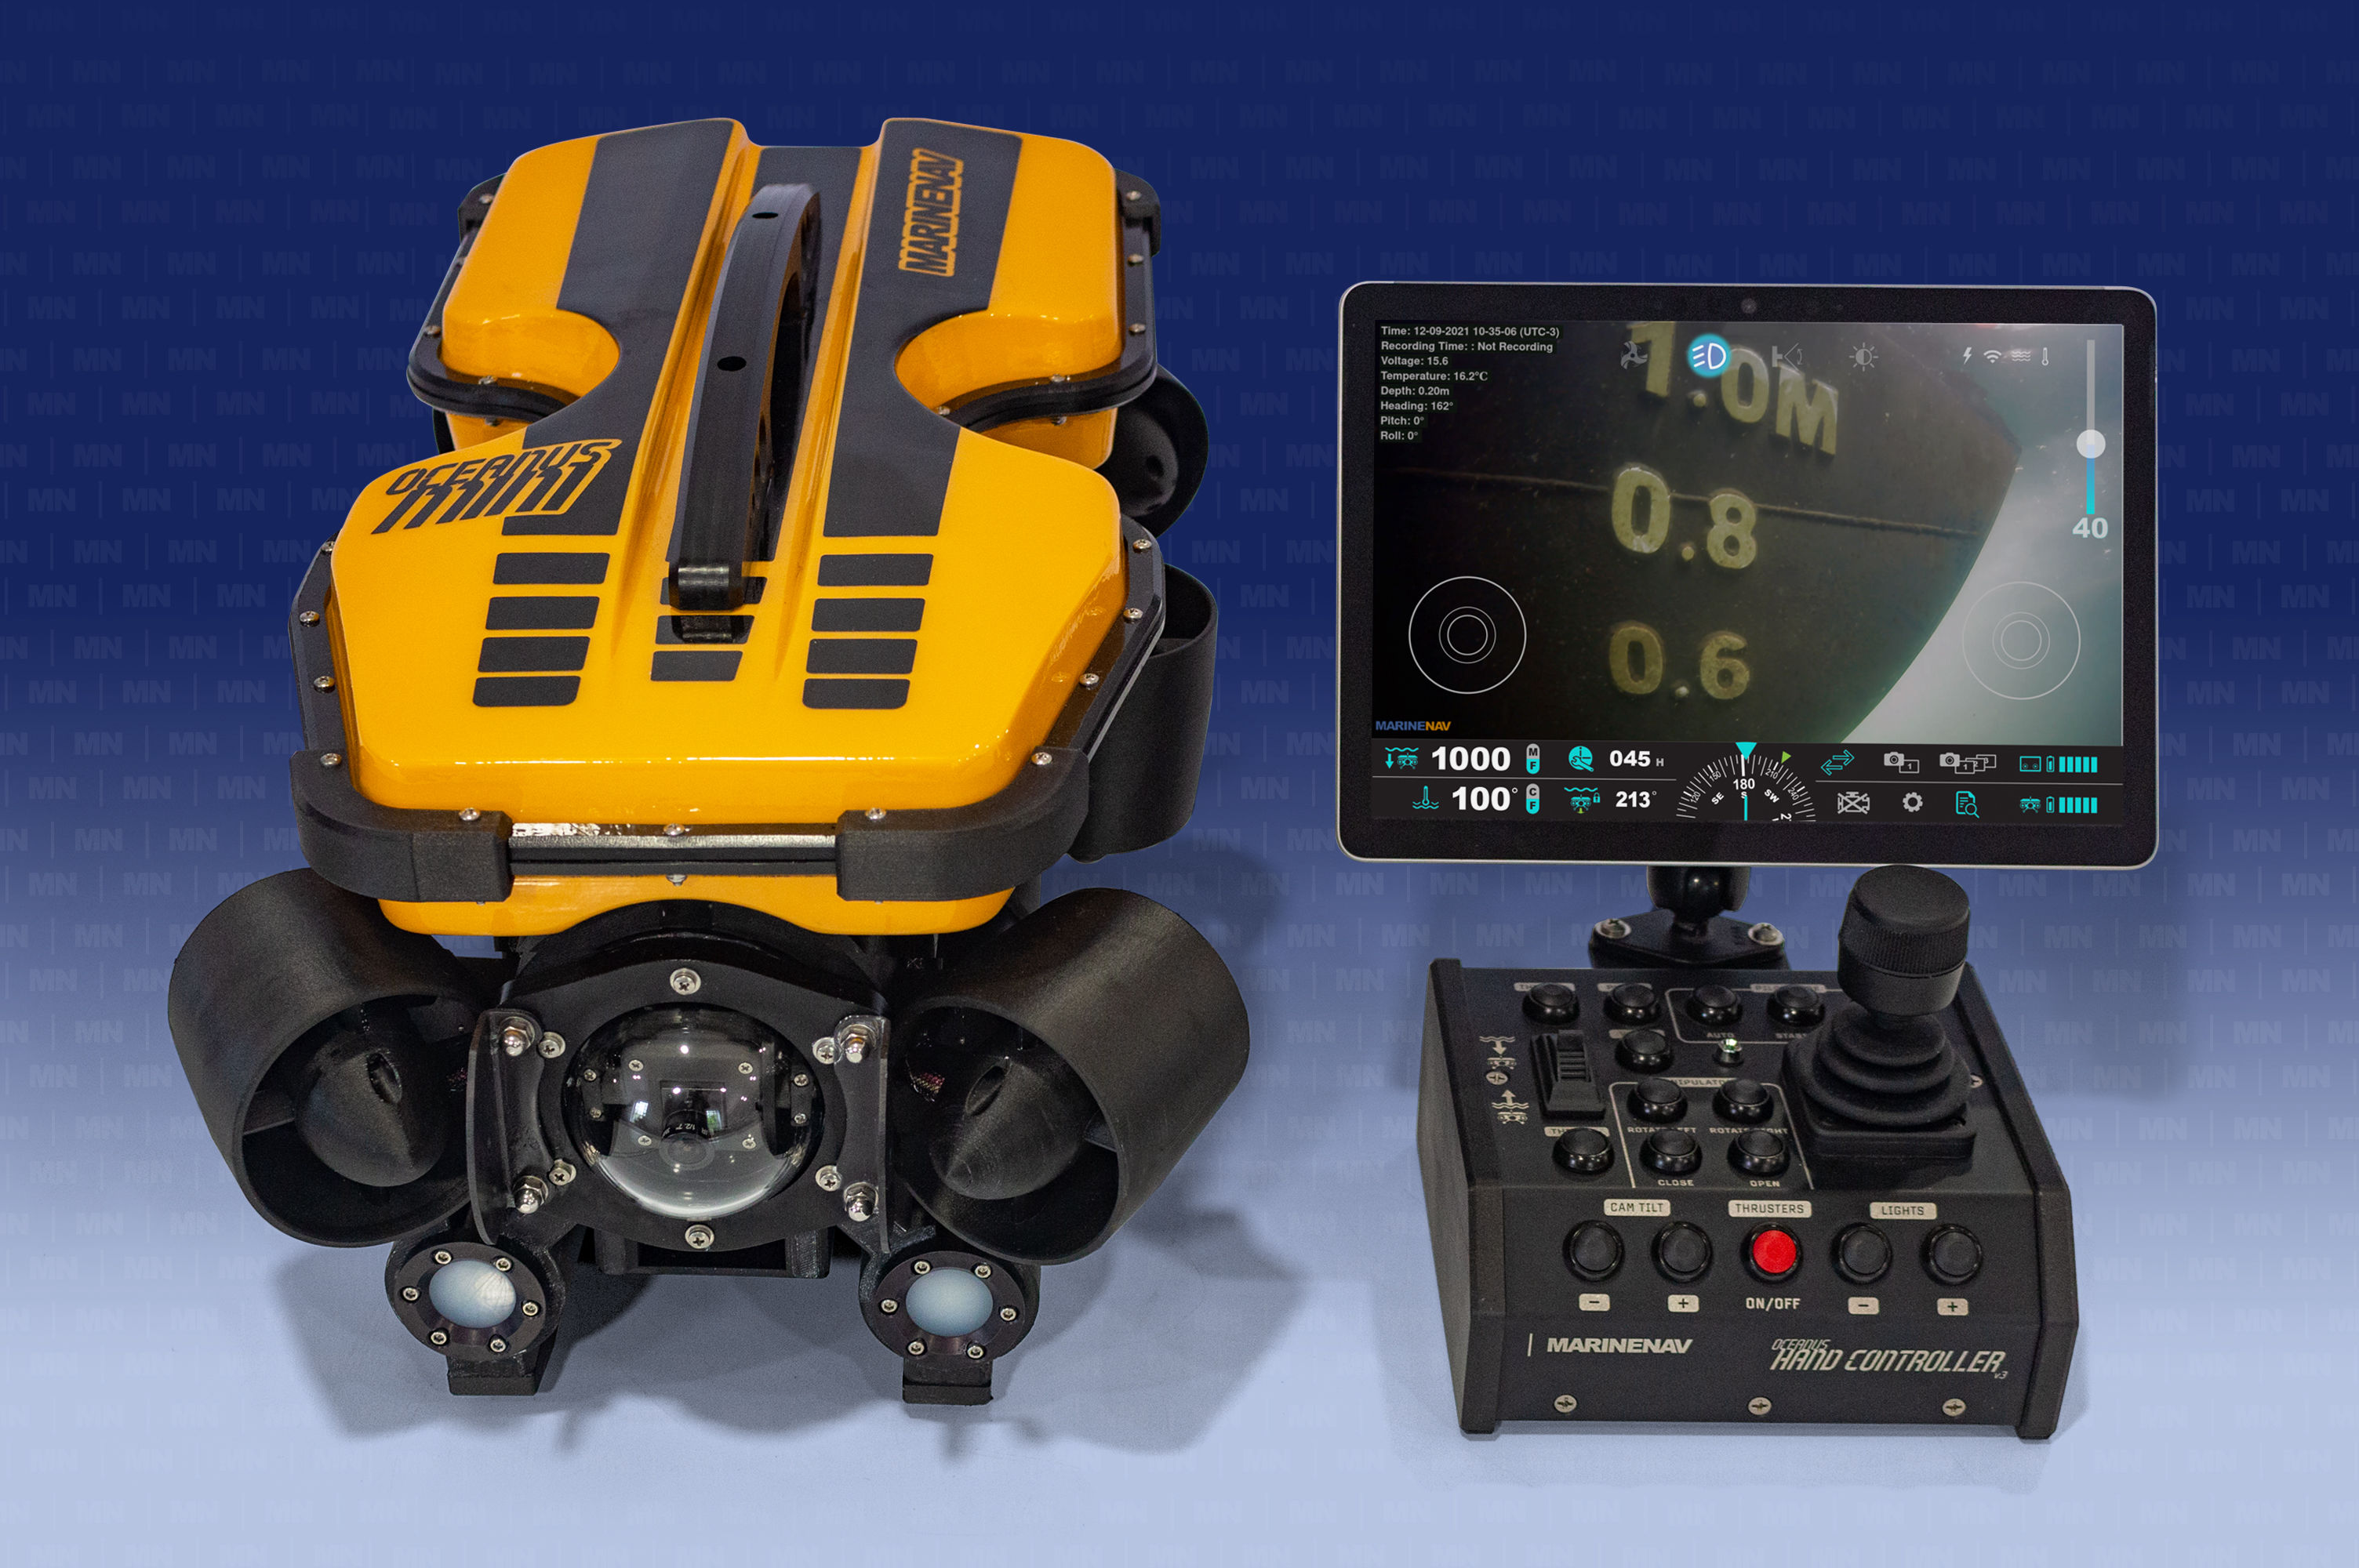 Responsive ROV hand controllers. Rugged topside ROV control hub. Touch-sensitive software